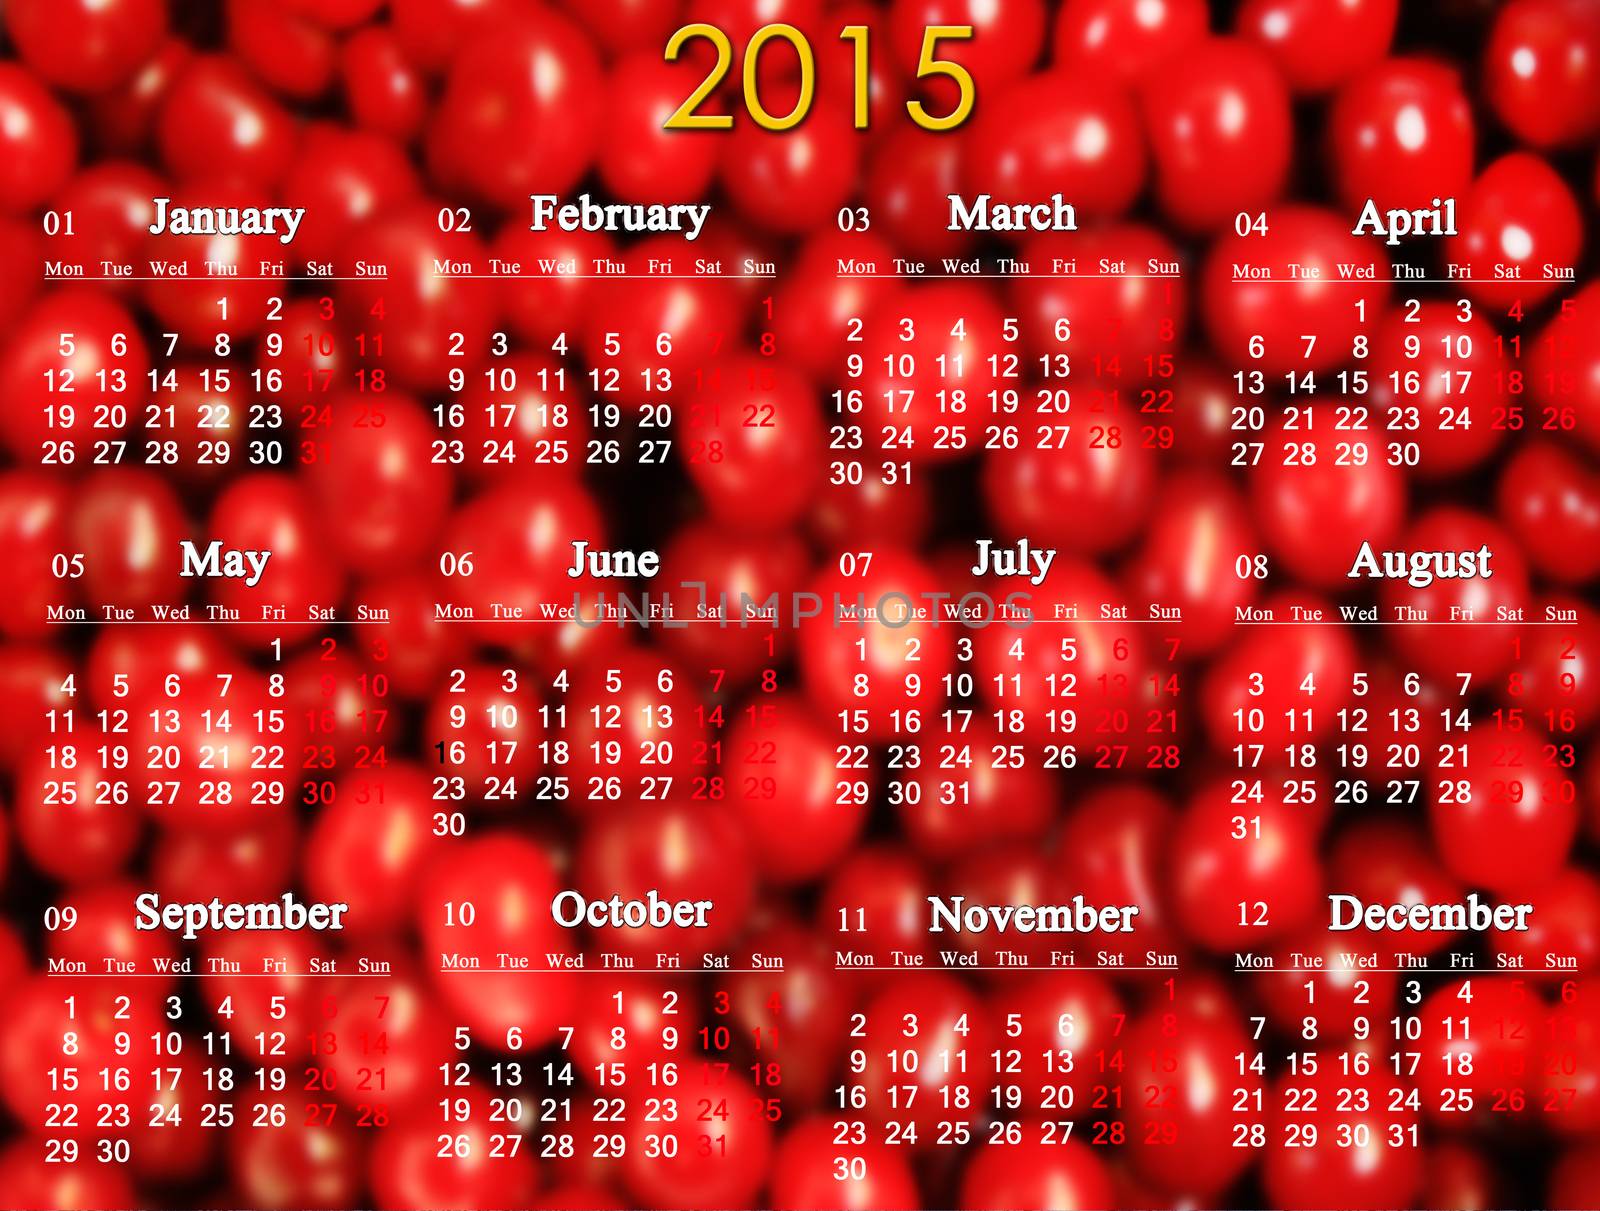 calendar for 2015 year on the red cherry's background by alexmak